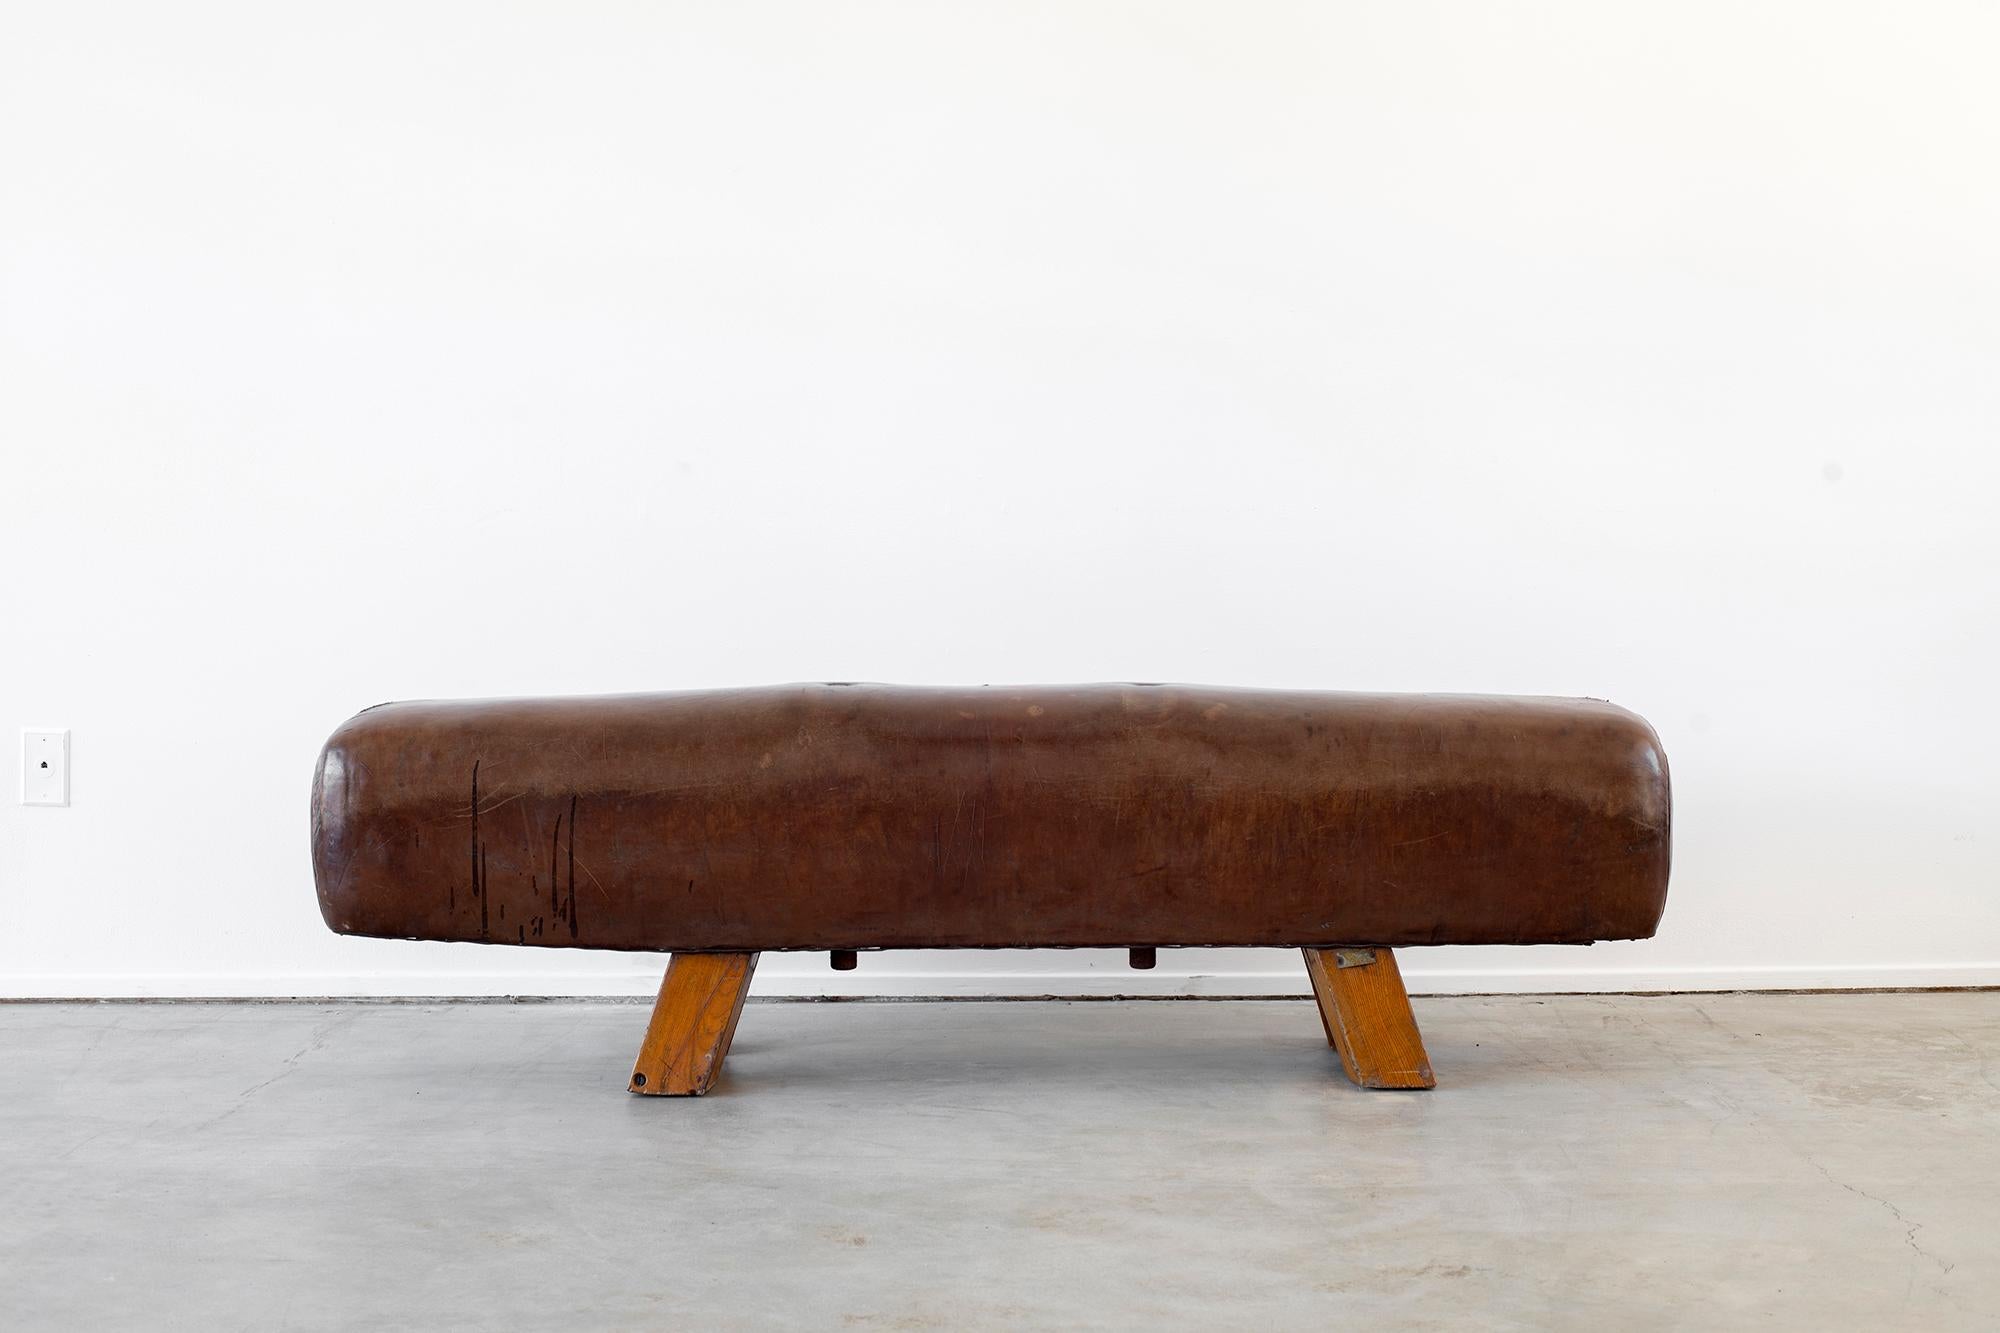 Wonderful Belgian leather gym bench circa 1930s with fantastic patina and lines.
 
  